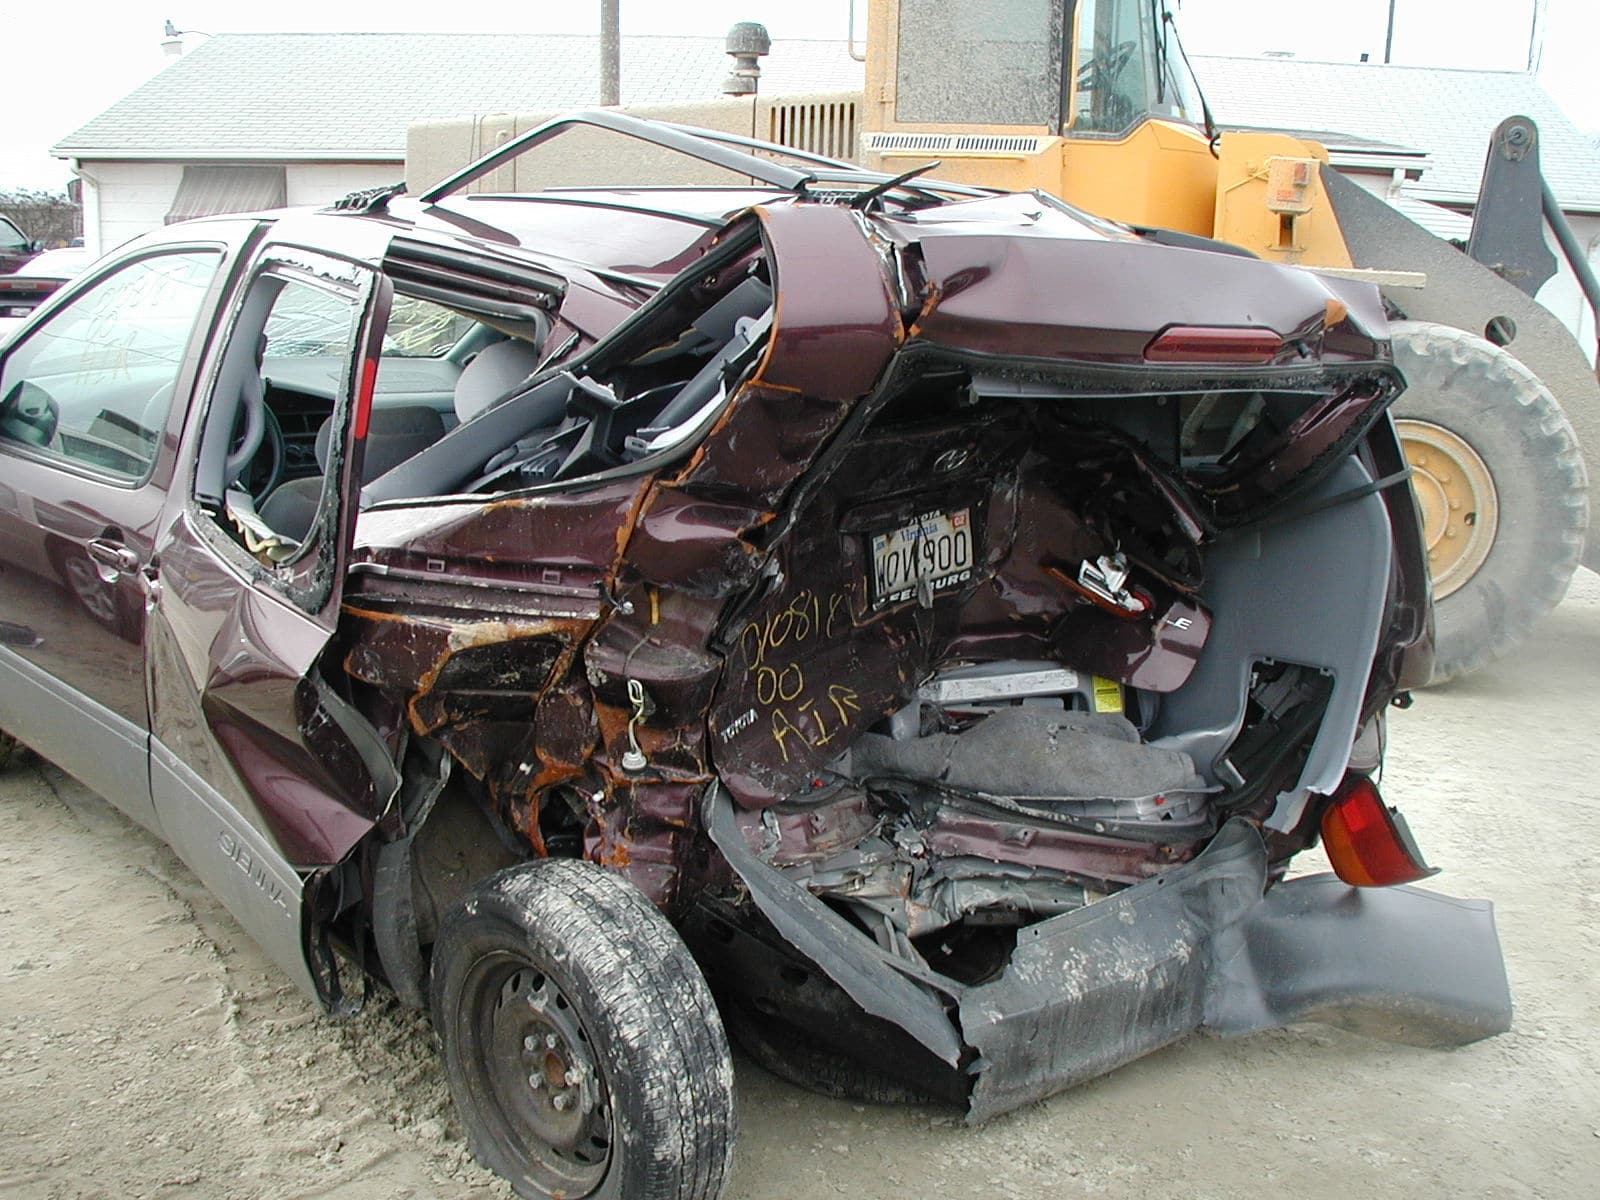 The minivan the Lang family was riding in on Nov. 27, 2001, when a reckless driver rear-ended their minivan, crushing the back half of the vehicle like an accordion. (Courtesy/ Kelly Lang)